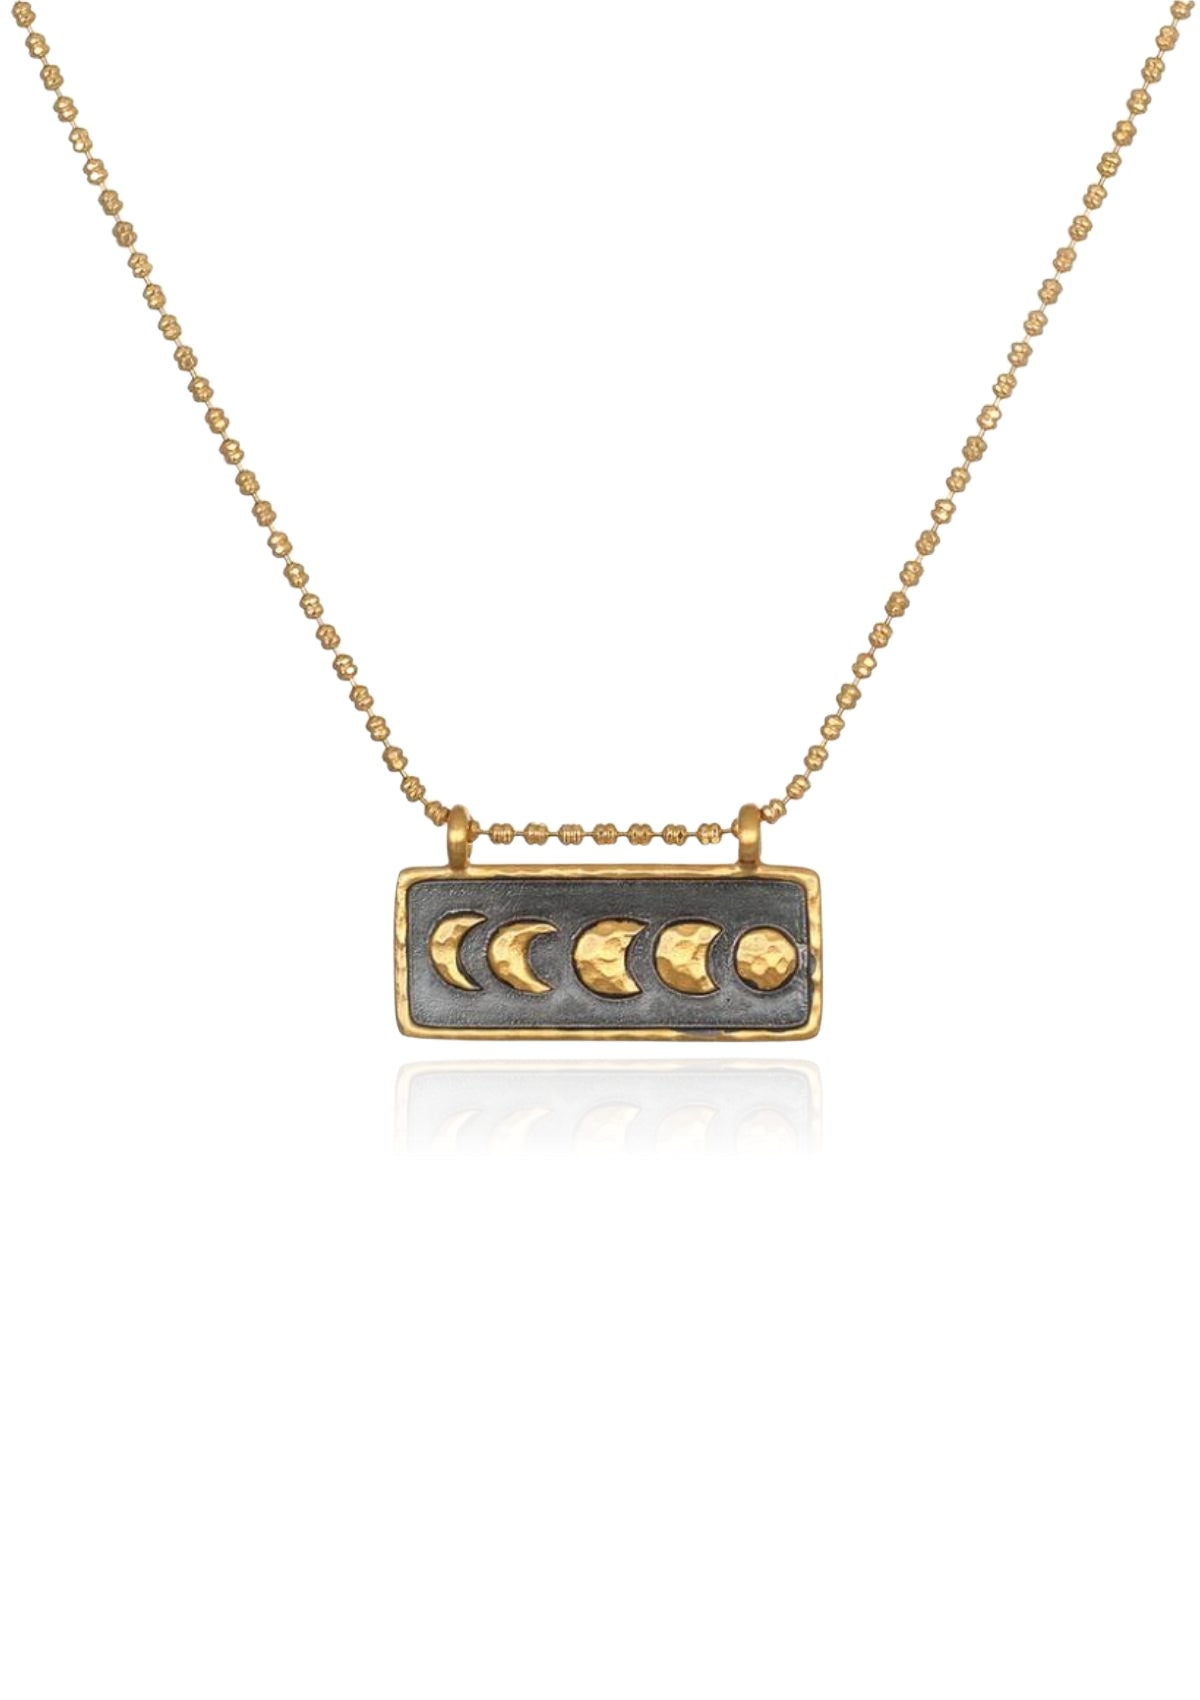 Moonphase Black and Gold Bar Necklace, 18" -Satya Jewelry- Ruby Jane-